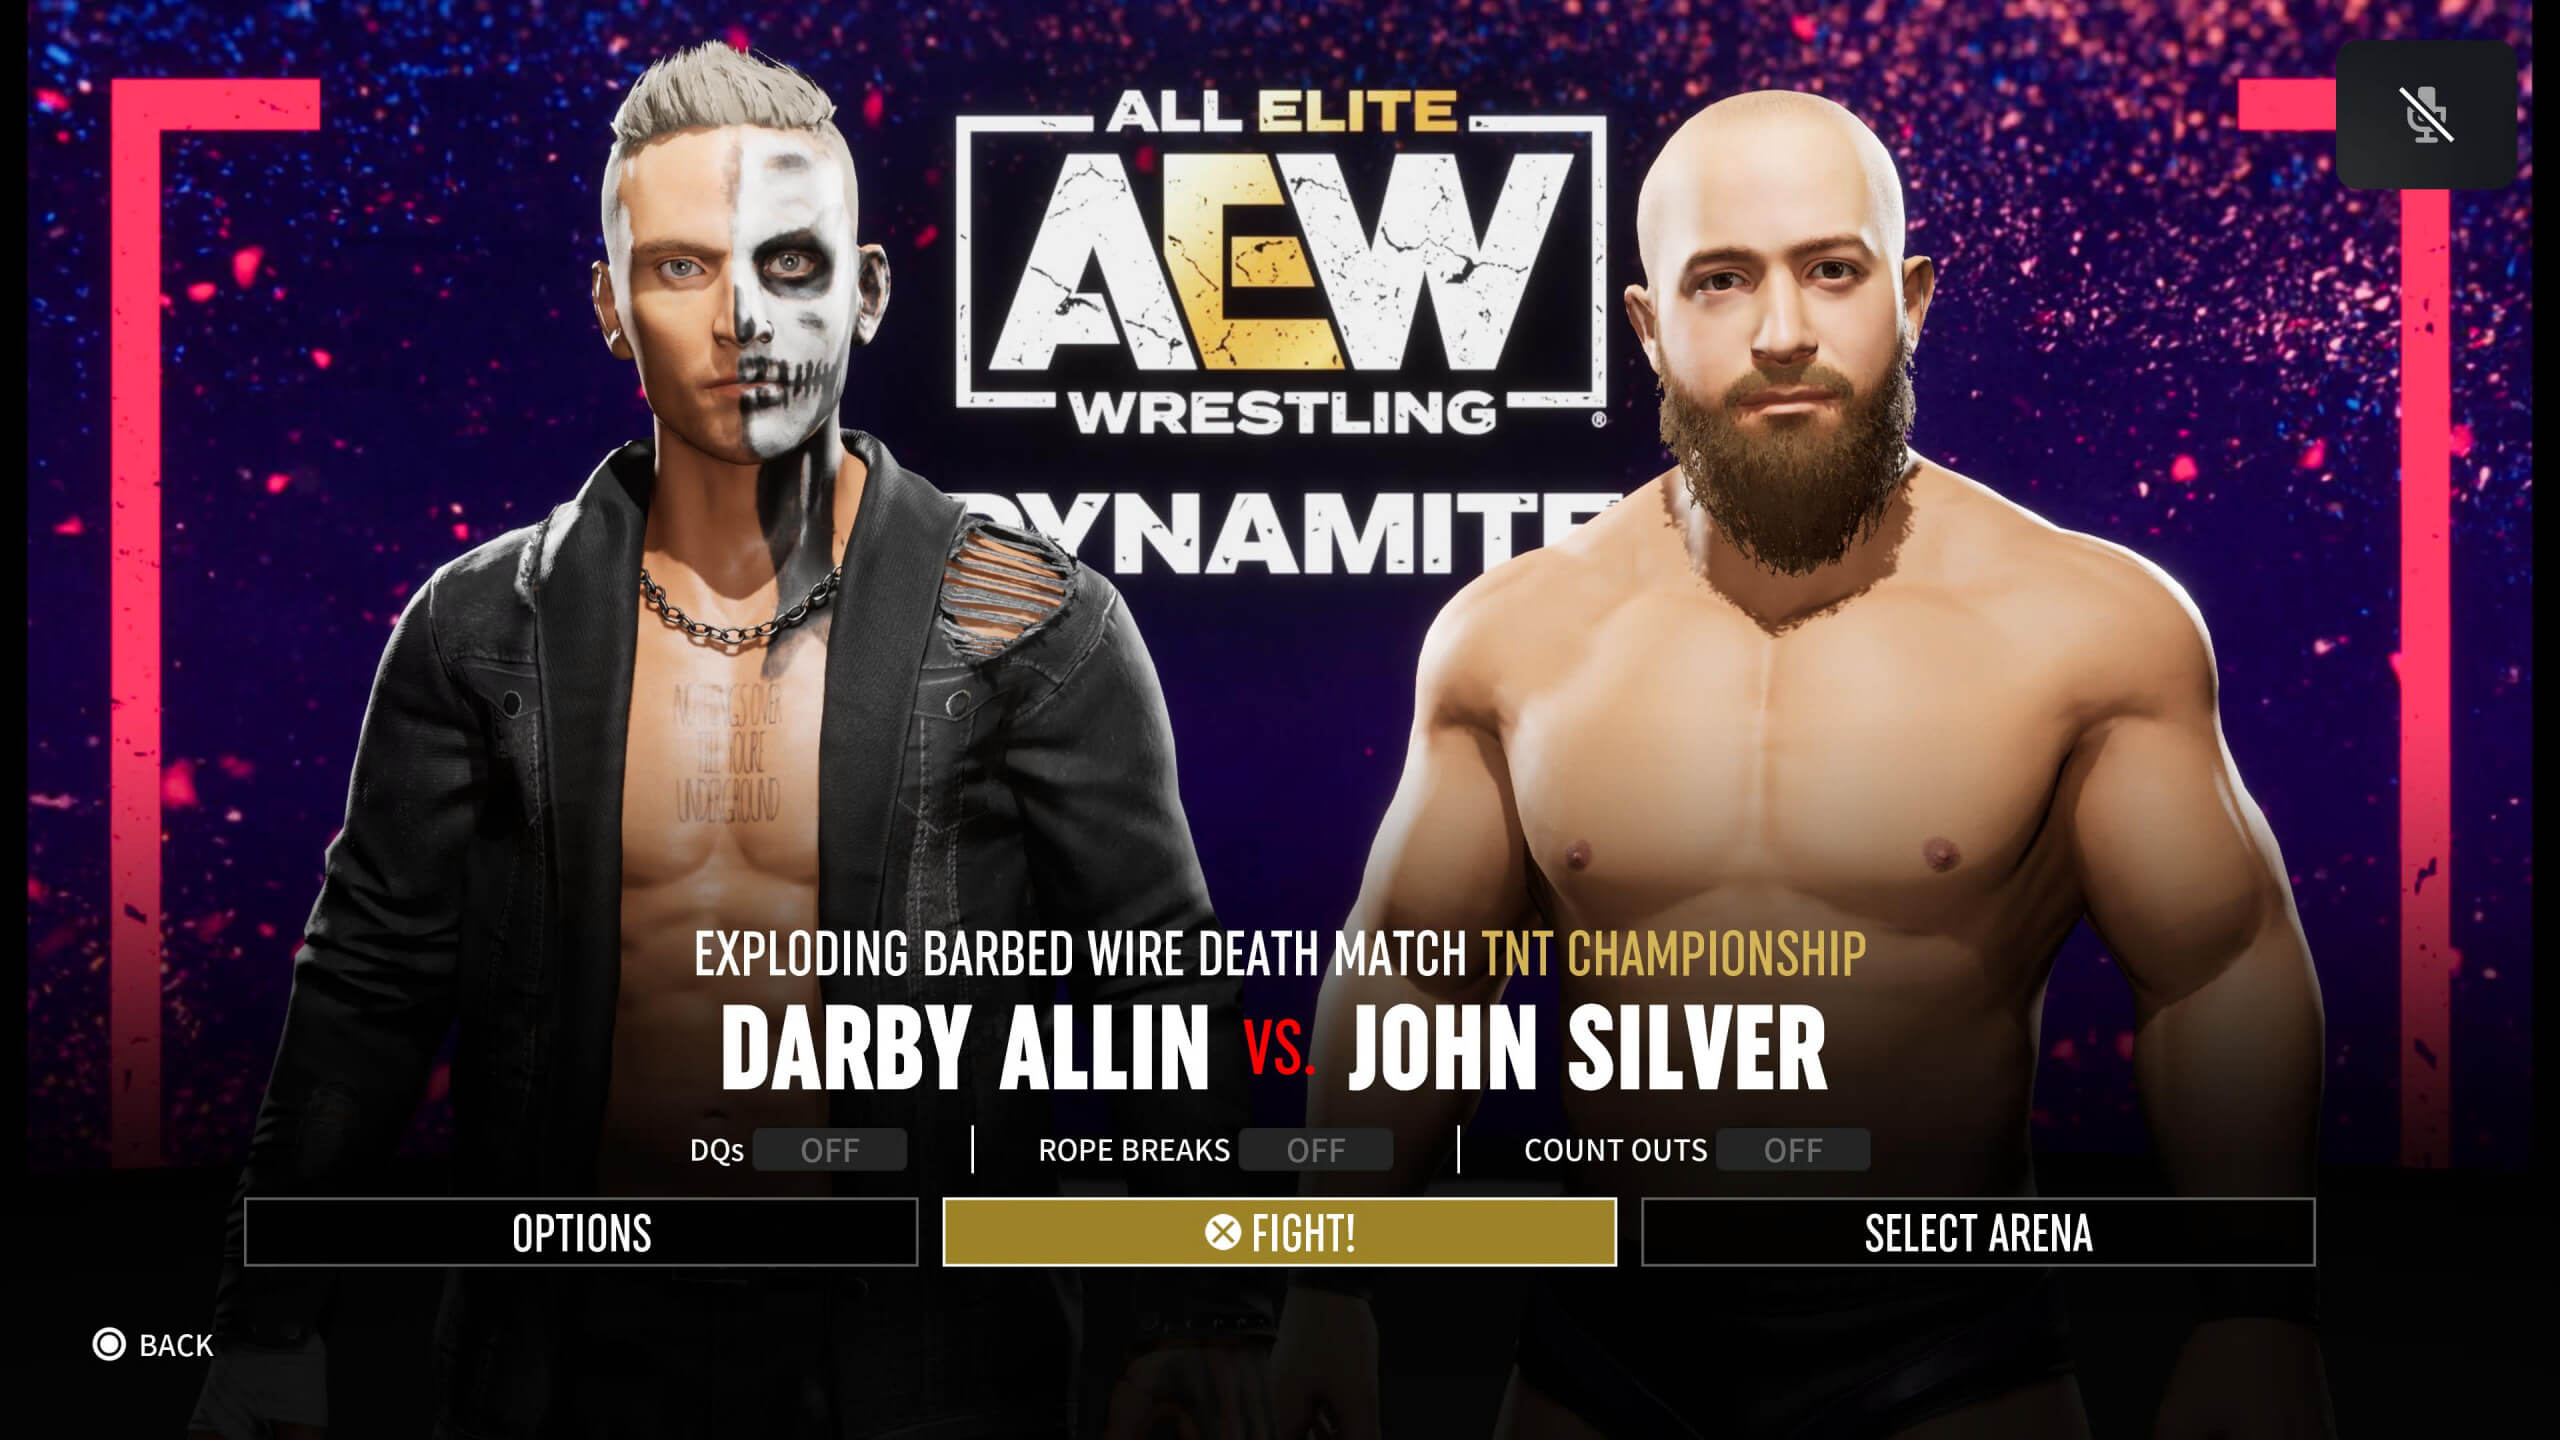 Darby Allin and John Silver match up screen. both characters are on screen with the options, fight and select arena options at the bottom.